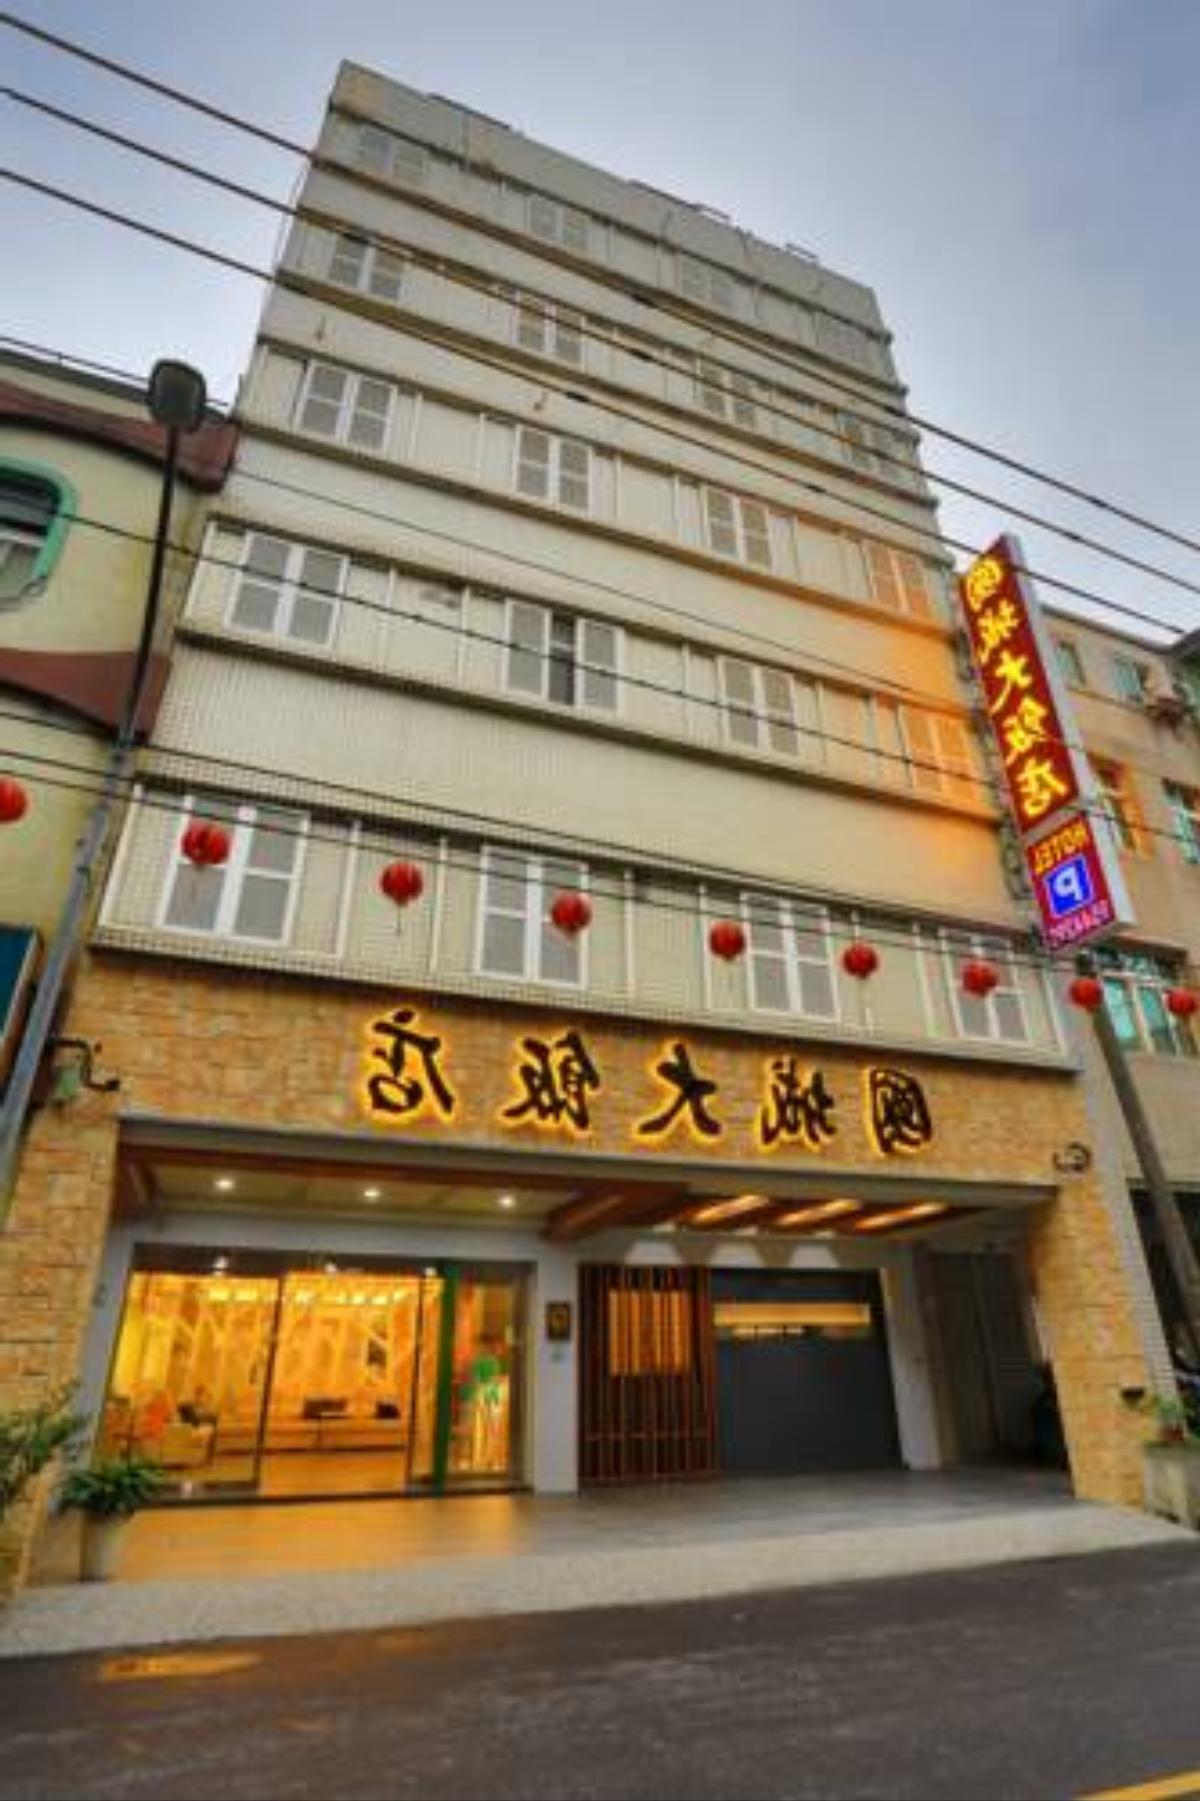 Guo Chen Hotel Hotel Luodong Taiwan